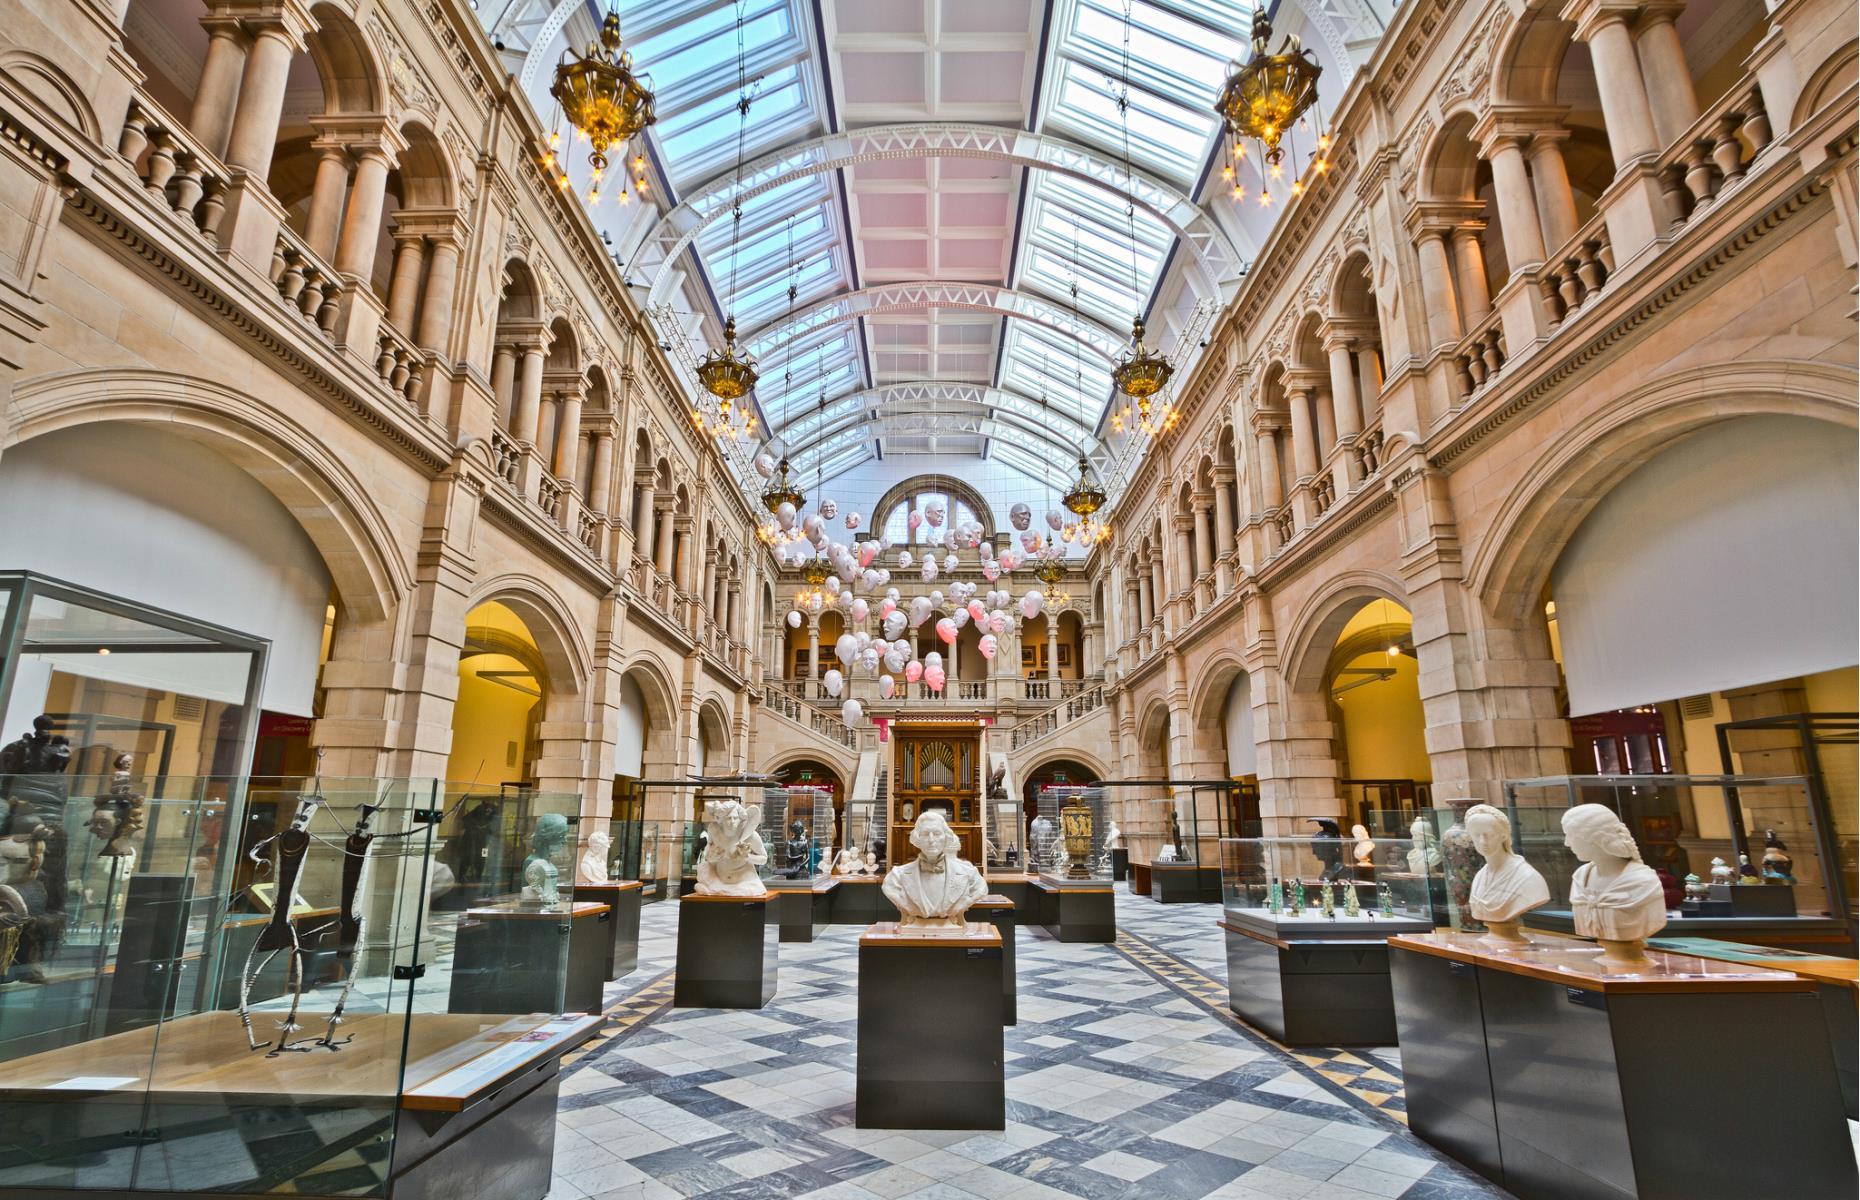 <p>One of Scotland’s most popular free attractions, the Kelvingrove Art Gallery and Museum has been a firm favourite in <a href="https://www.loveexploring.com/news/71971/what-to-so-in-glasgow-scotland">Glasgow</a> since it opened in 1901. Inside its stunning Spanish Baroque building is one of the greatest art collections in Europe spanning thousands of years. Highlights from the collection include Rembrandt’s ‘Man in Armour’ and ‘Christ the Adulteress’ by Titian along with work by Salvador Dalí and Vincent van Gogh. </p>